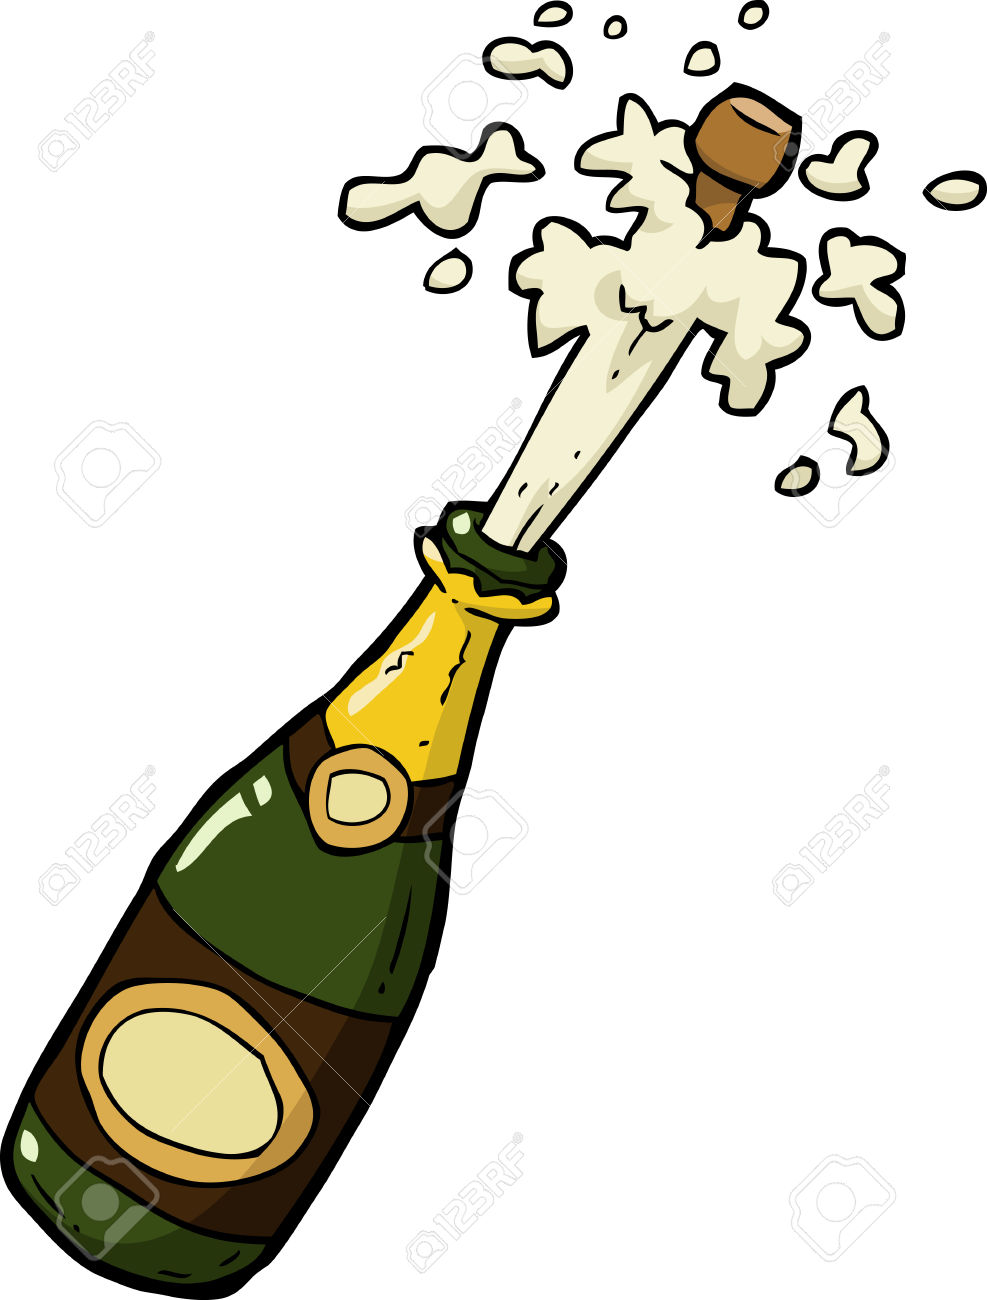 Champagne bottle clipart free download jpg